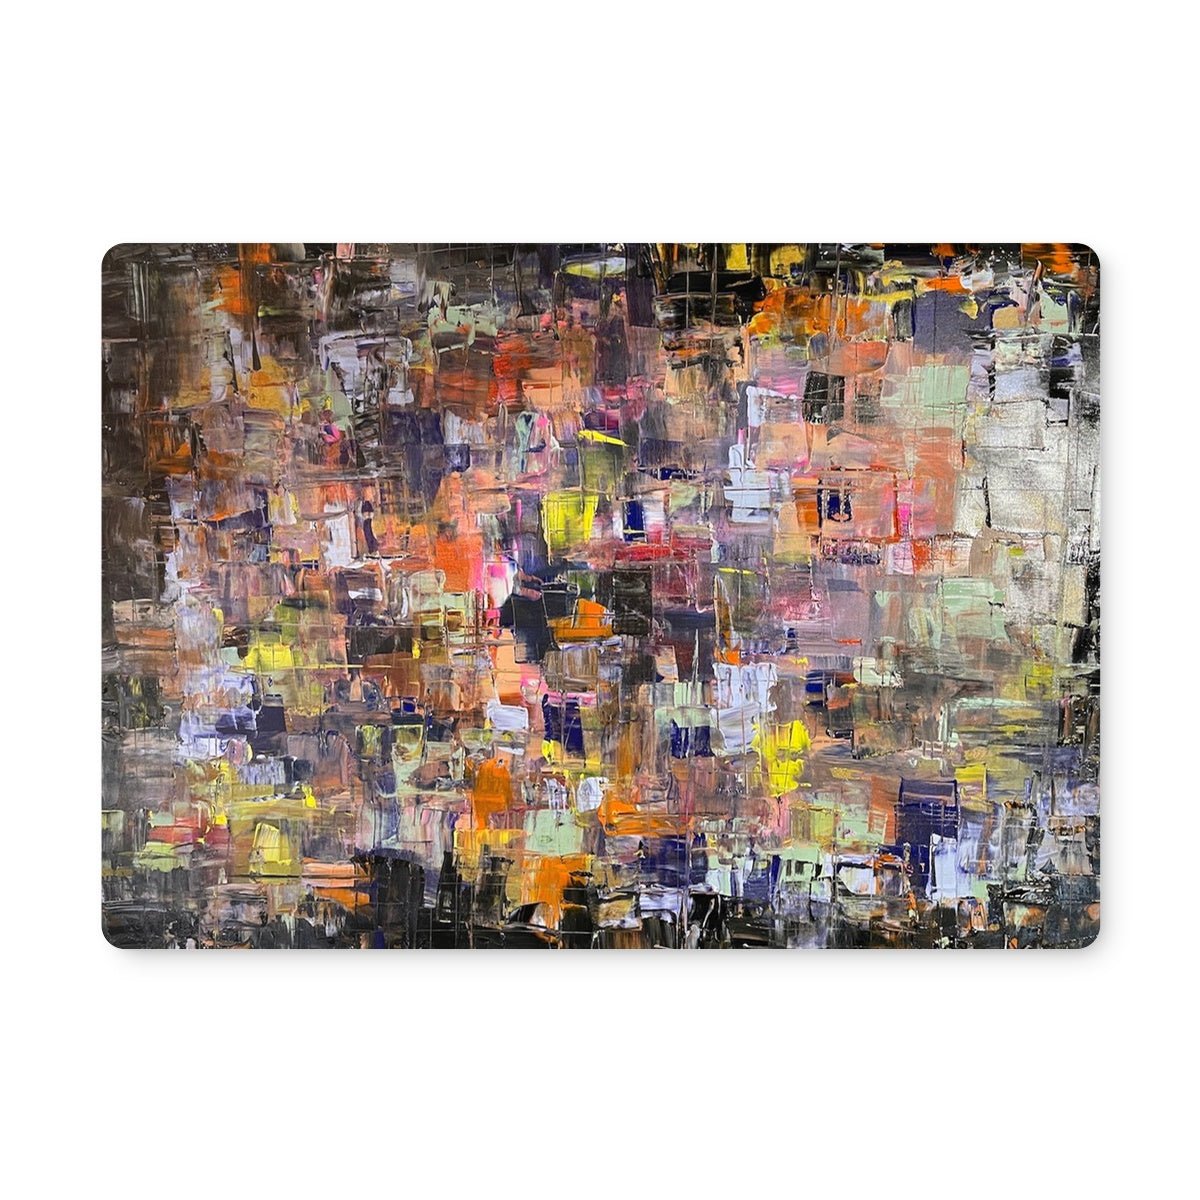 Never Enough Art Gifts Placemat-Placemats-Abstract & Impressionistic Art Gallery-4 Placemats-Paintings, Prints, Homeware, Art Gifts From Scotland By Scottish Artist Kevin Hunter